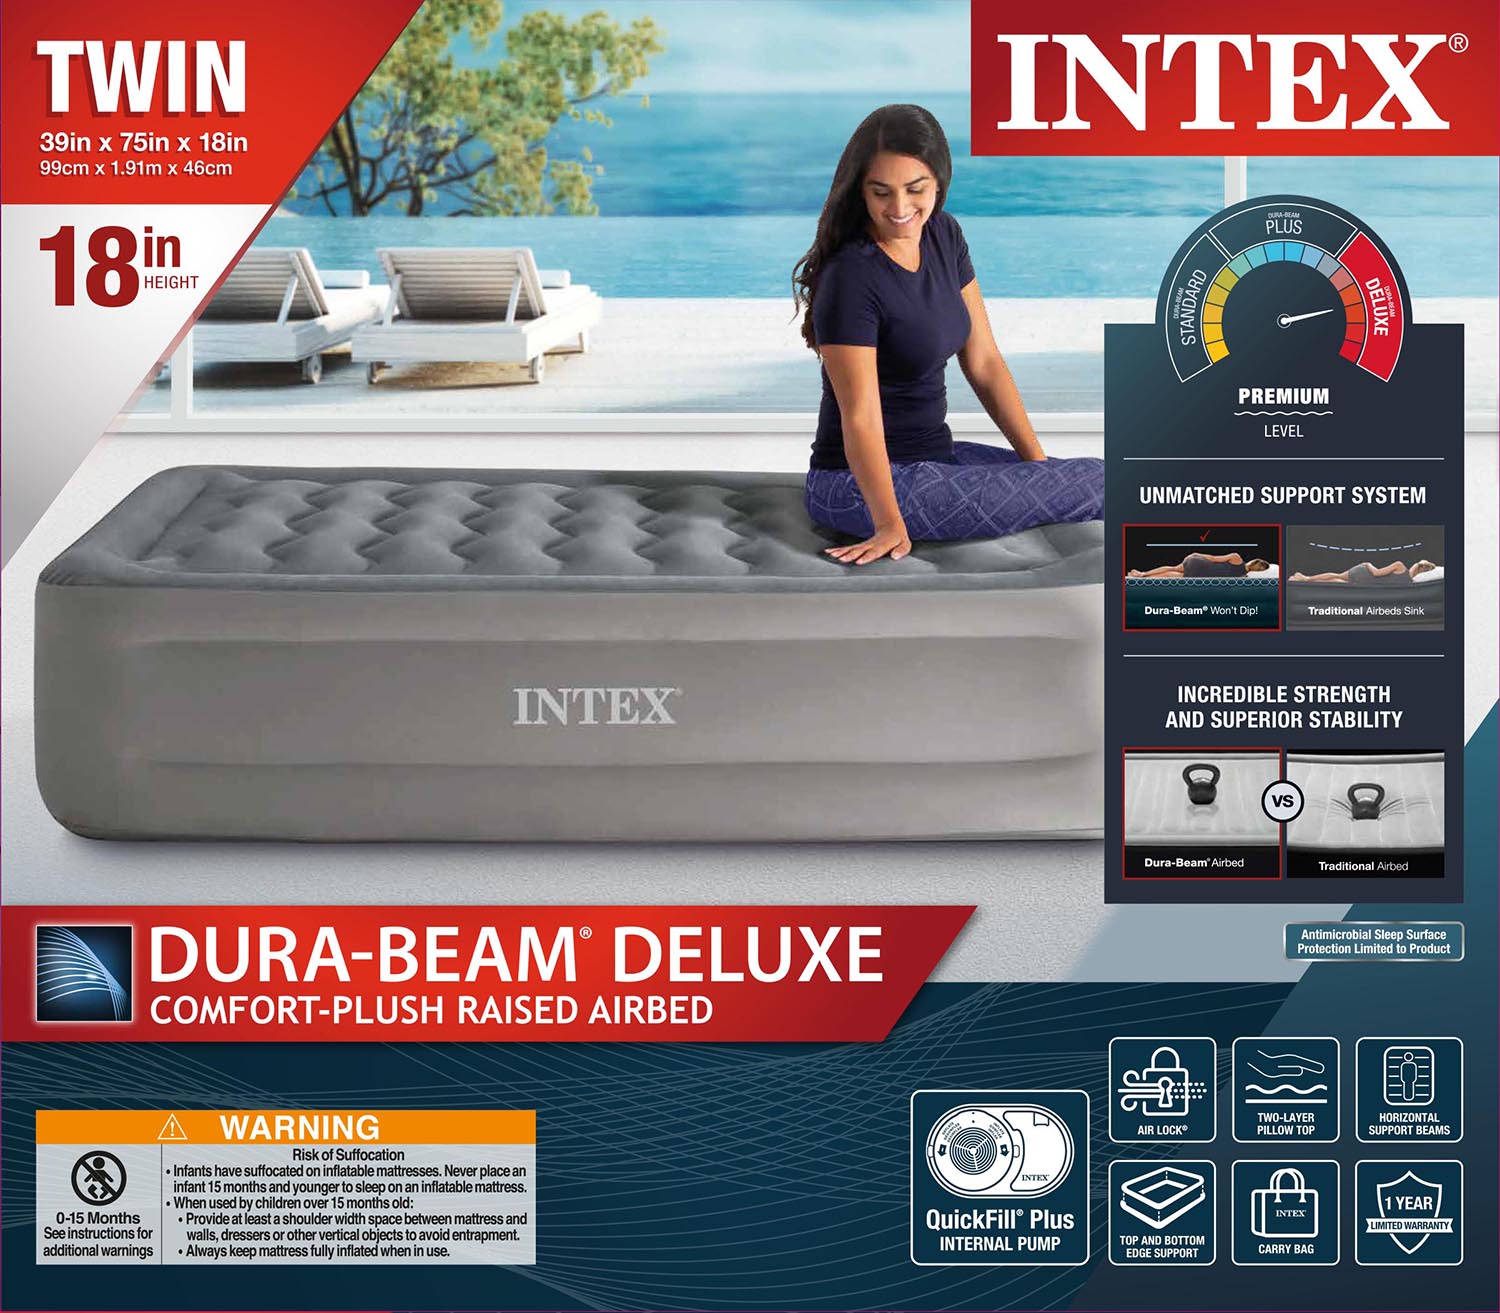 Intex 18" High Comfort Plush Raised Air Mattress Bed with Built-in Pump - Twin - image 2 of 16